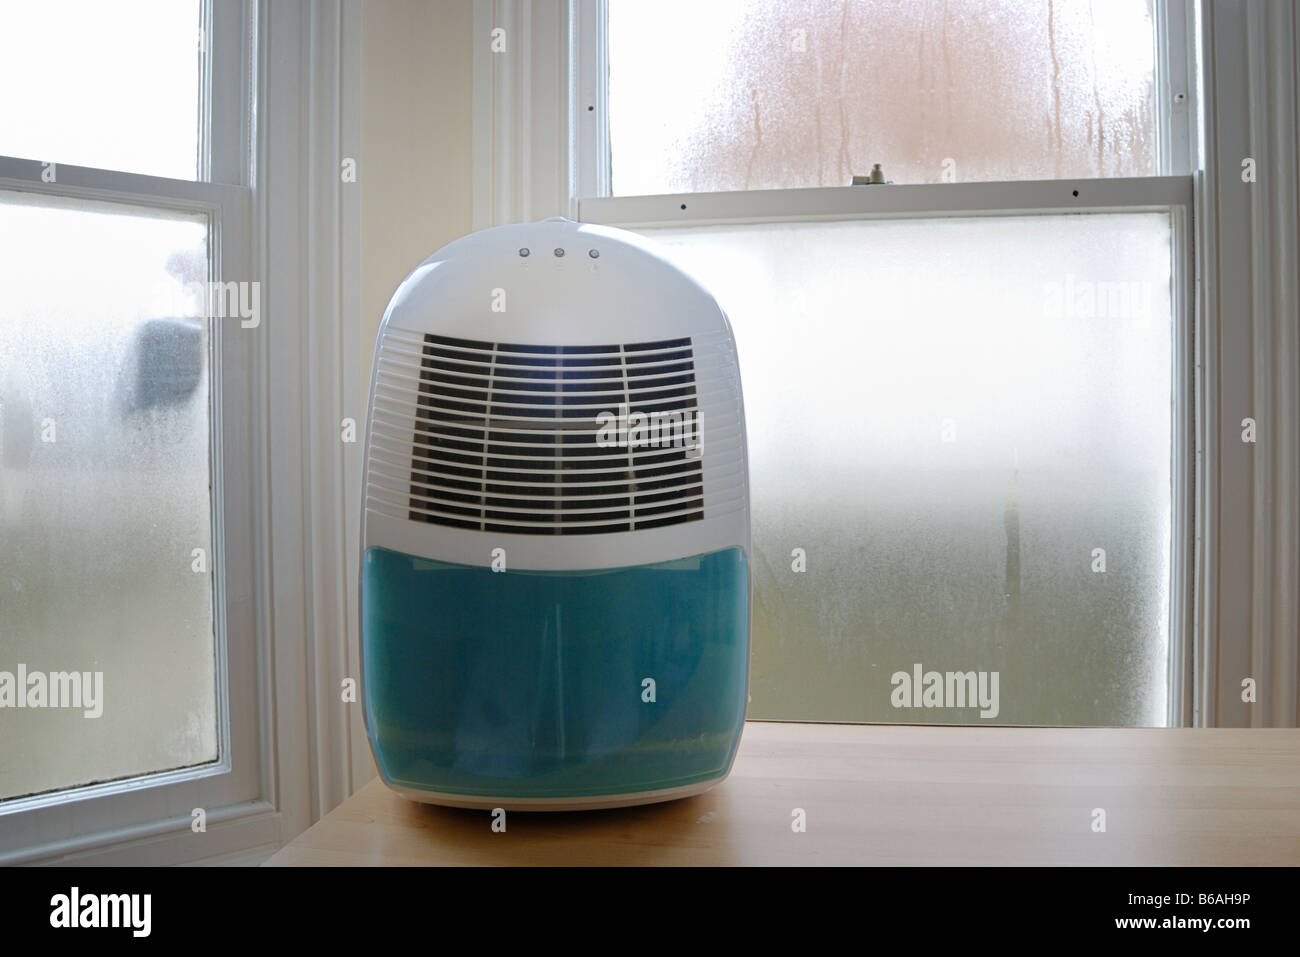 Dehumidifier in front of condensation on windows Stock Photo